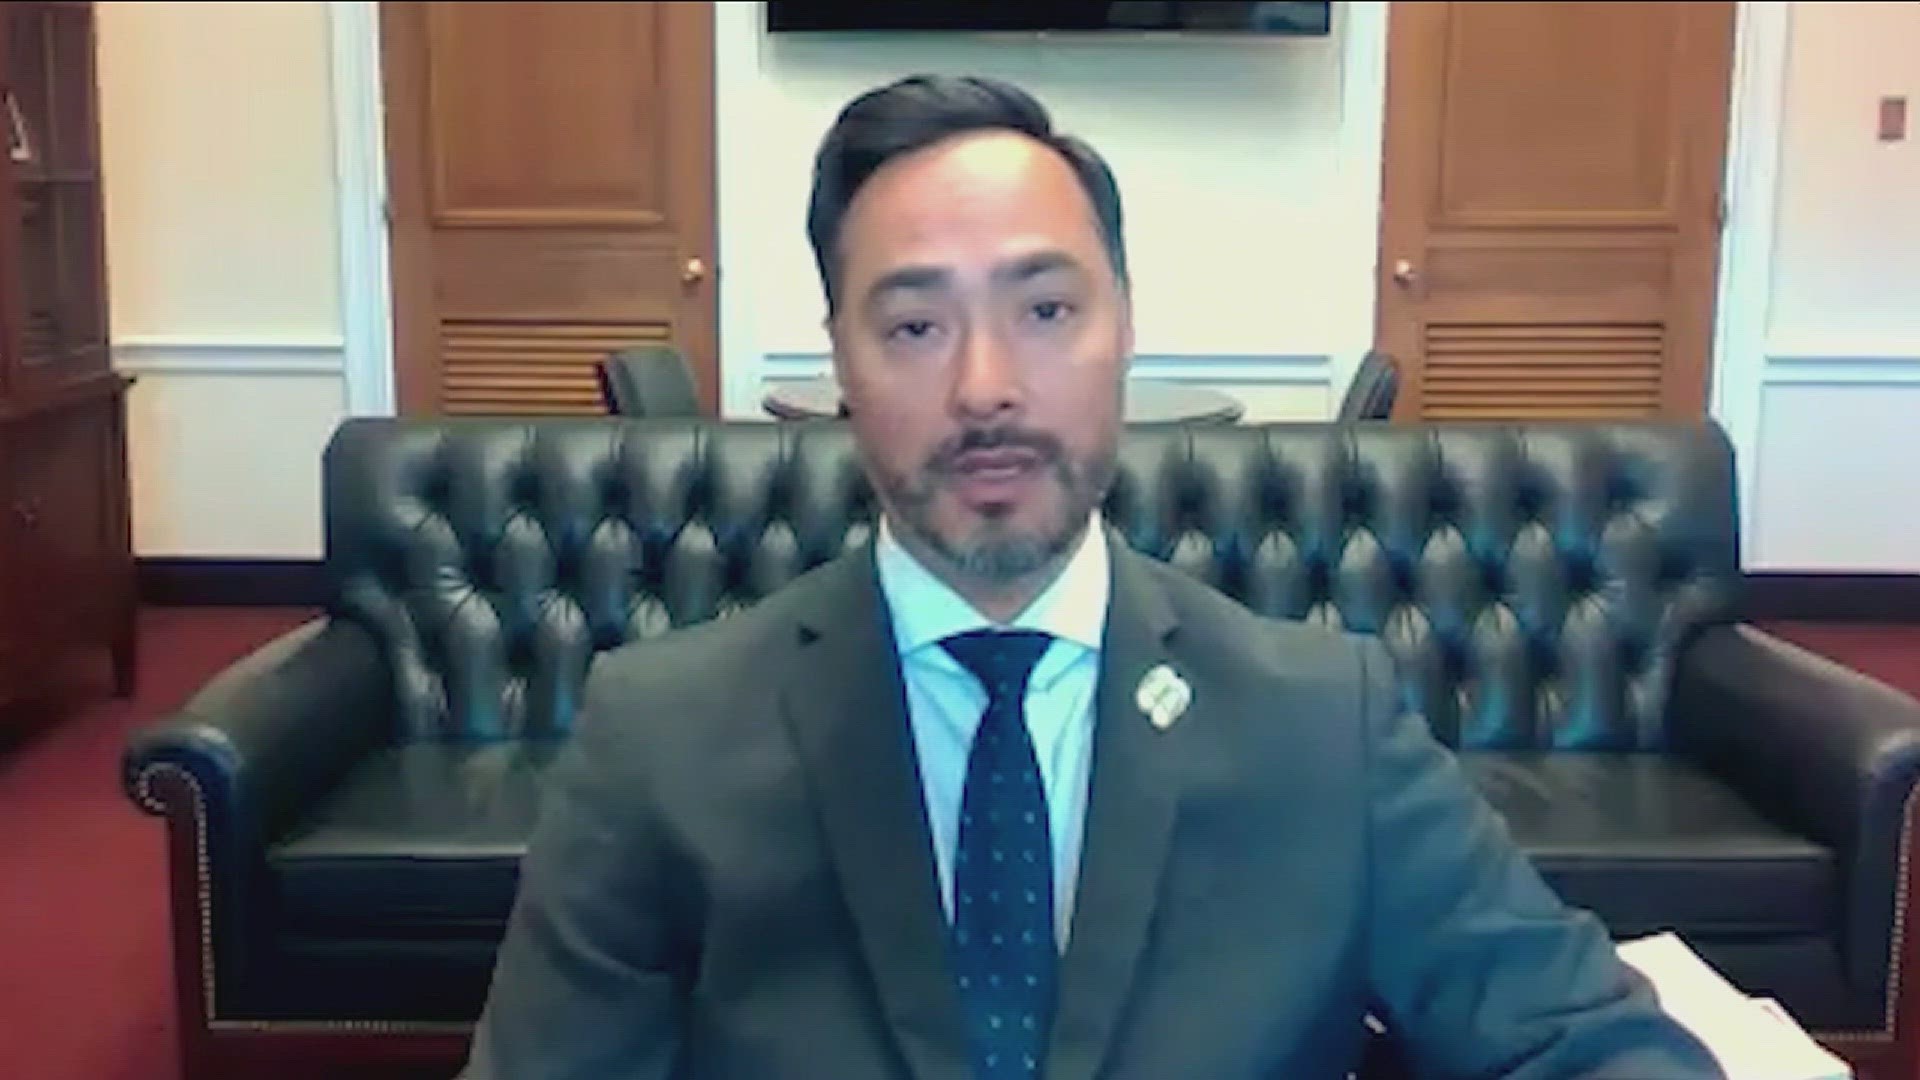 Congressman Joaquin Castro is calling on President Biden to address allegations of abuse at the border.